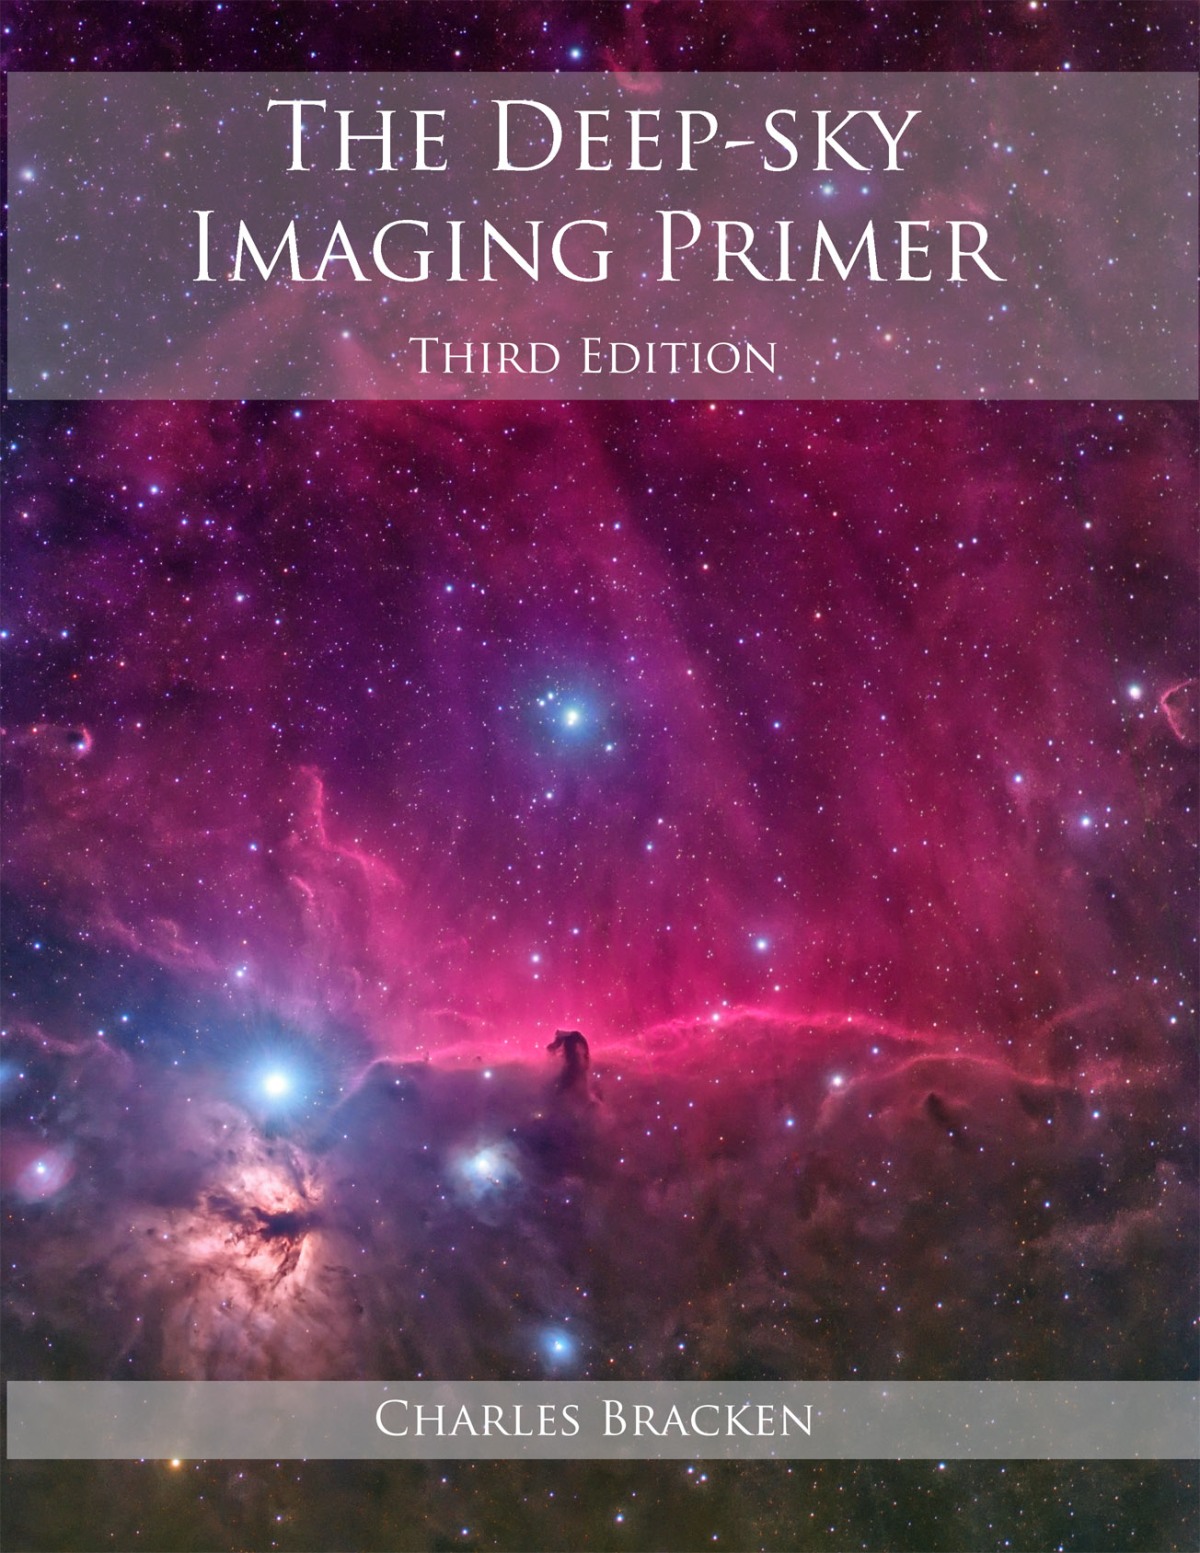 The 3rd edition of The Deep-sky Imaging Primer… and the 2nd edition of The Astrophotography Planner!